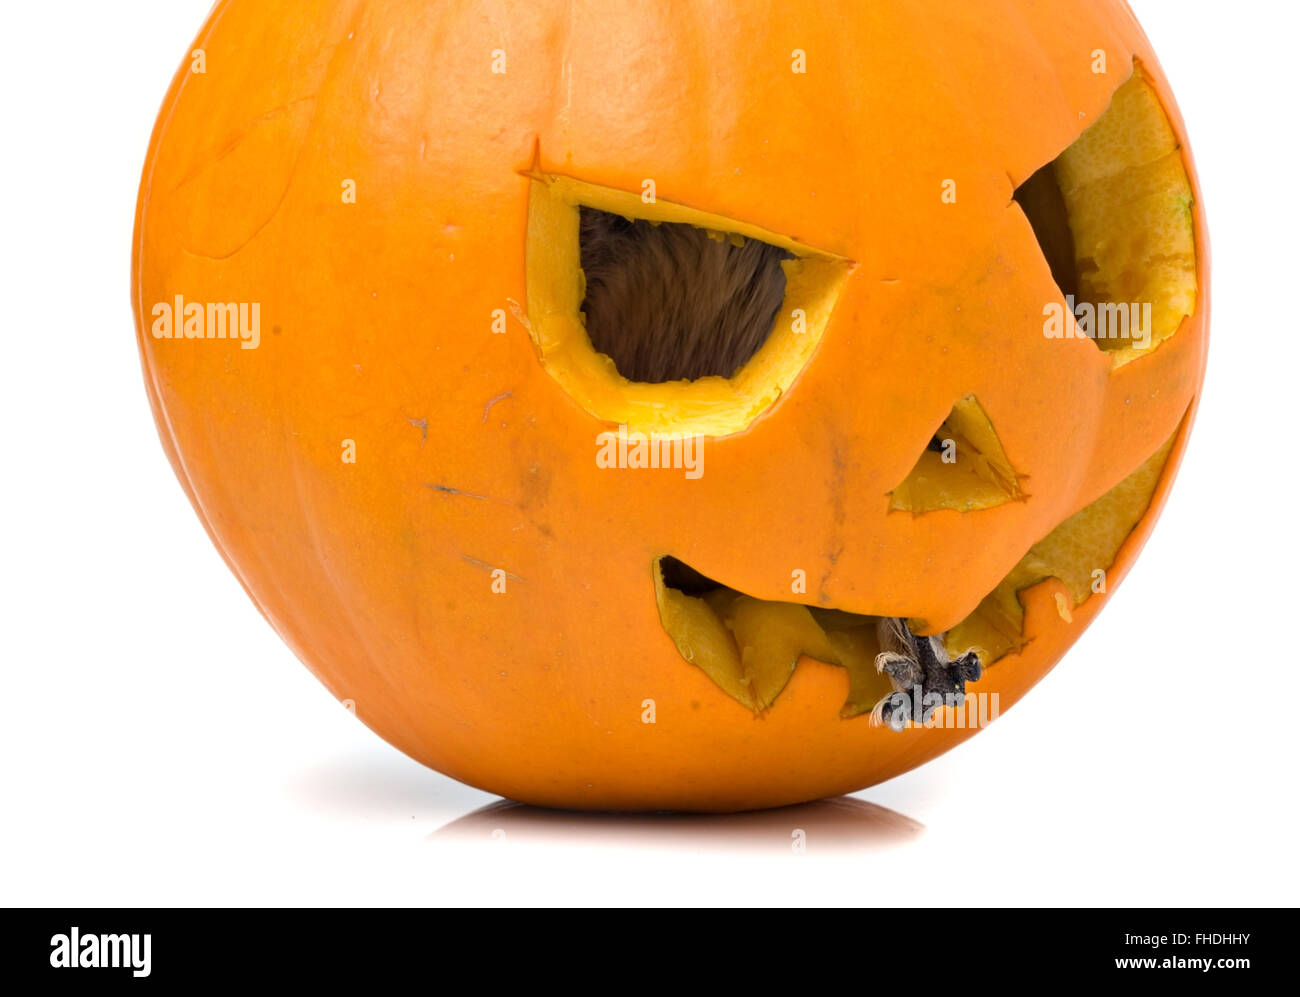 Halloween pumpkin with funny mouse inside Stock Photo